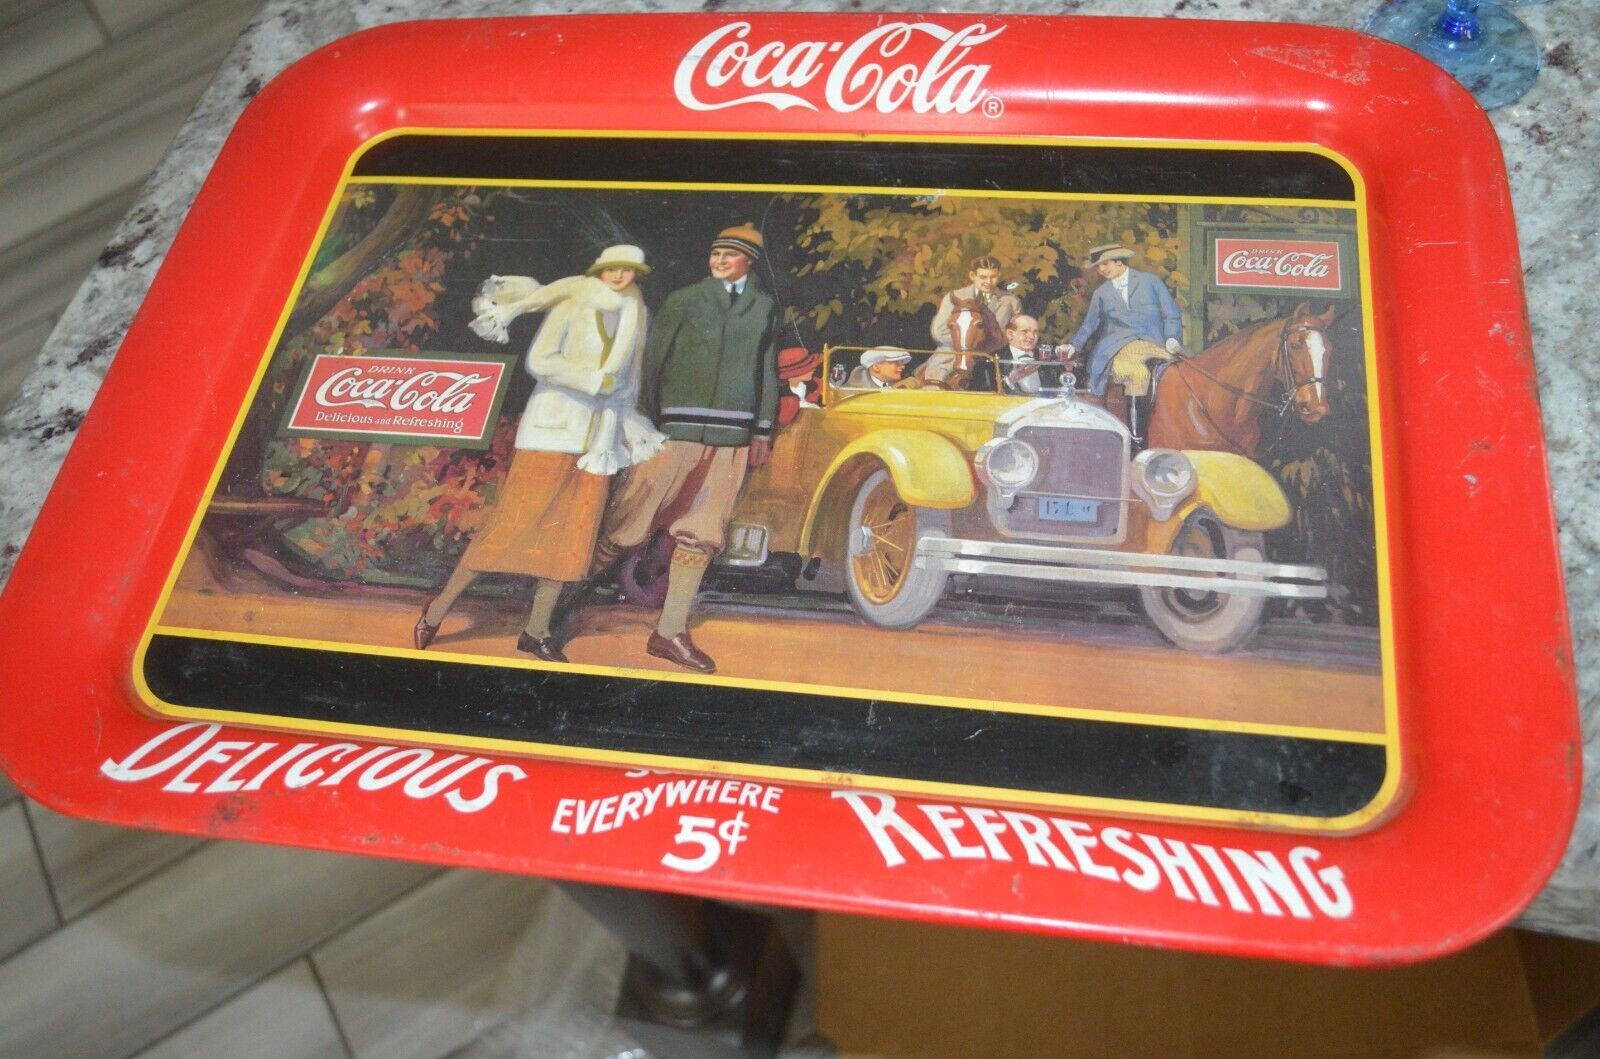 Primary image for Coca-Cola Serving TV Tray From 1987, With Touring Car & People from a 1924 Ad